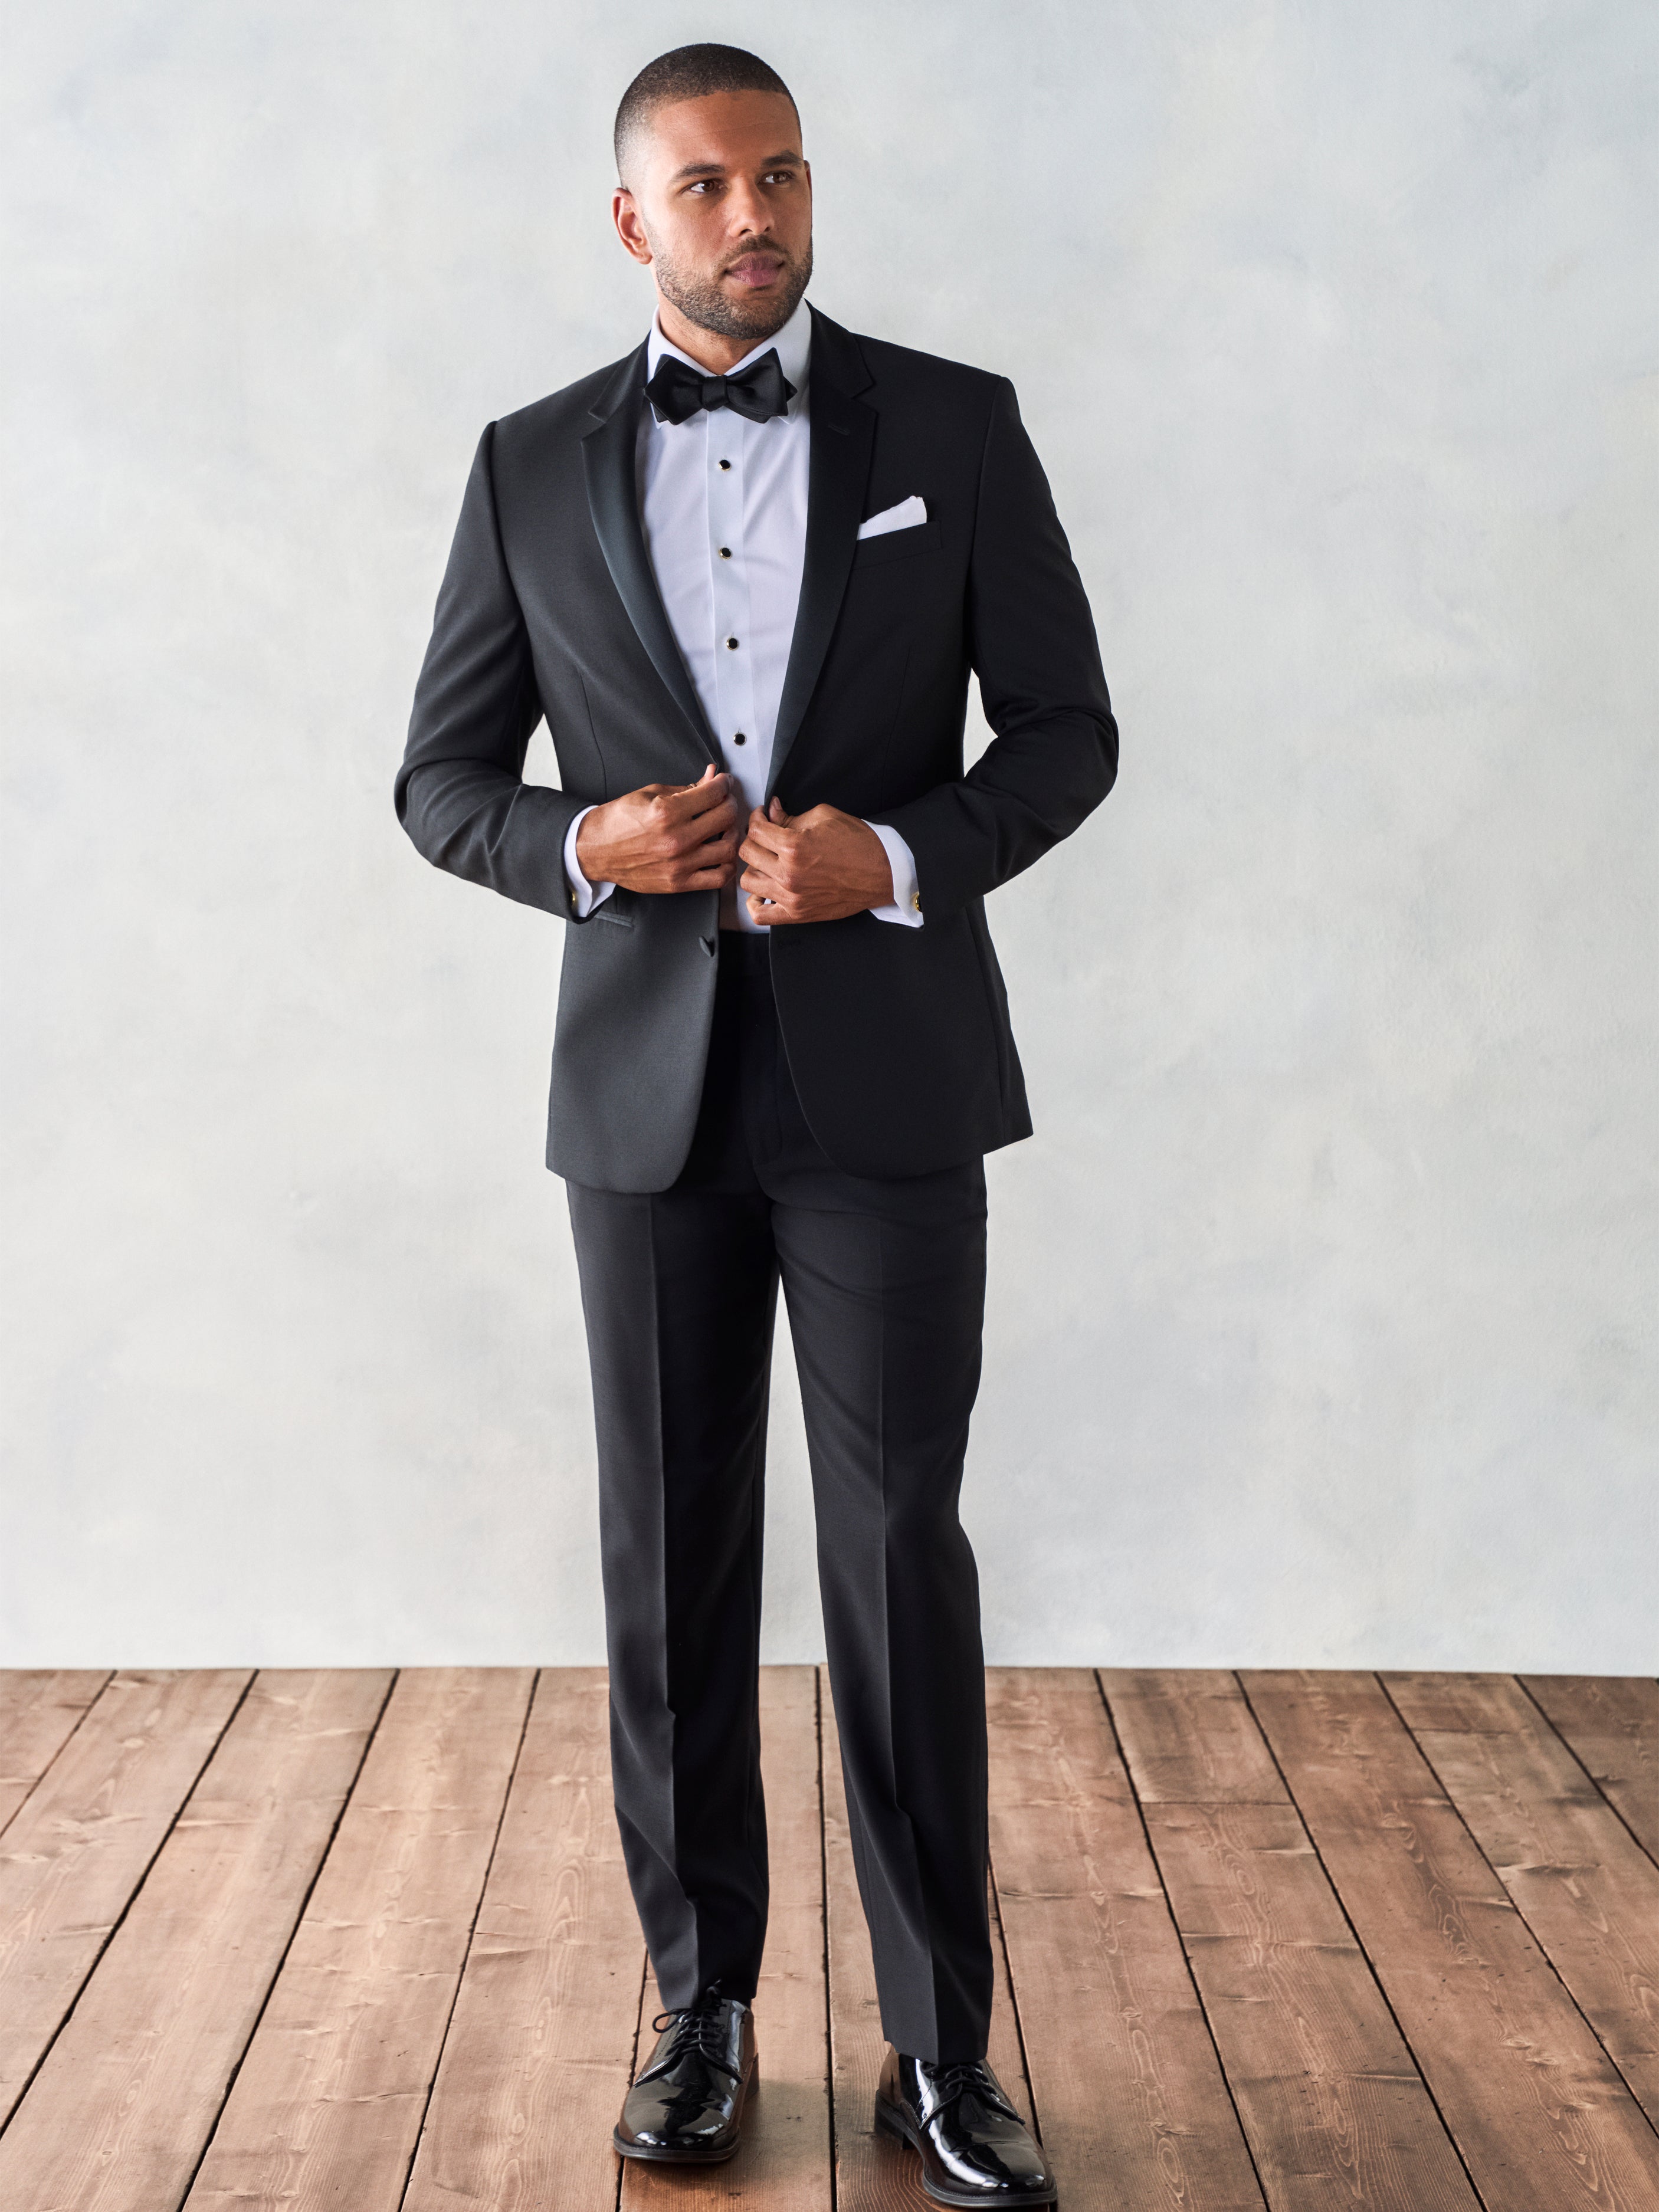 Suit or Tuxedo Tips | Tuxedo Junction | Men's Suits, Tuxedos, Formalwear,  Menswear and Accessories